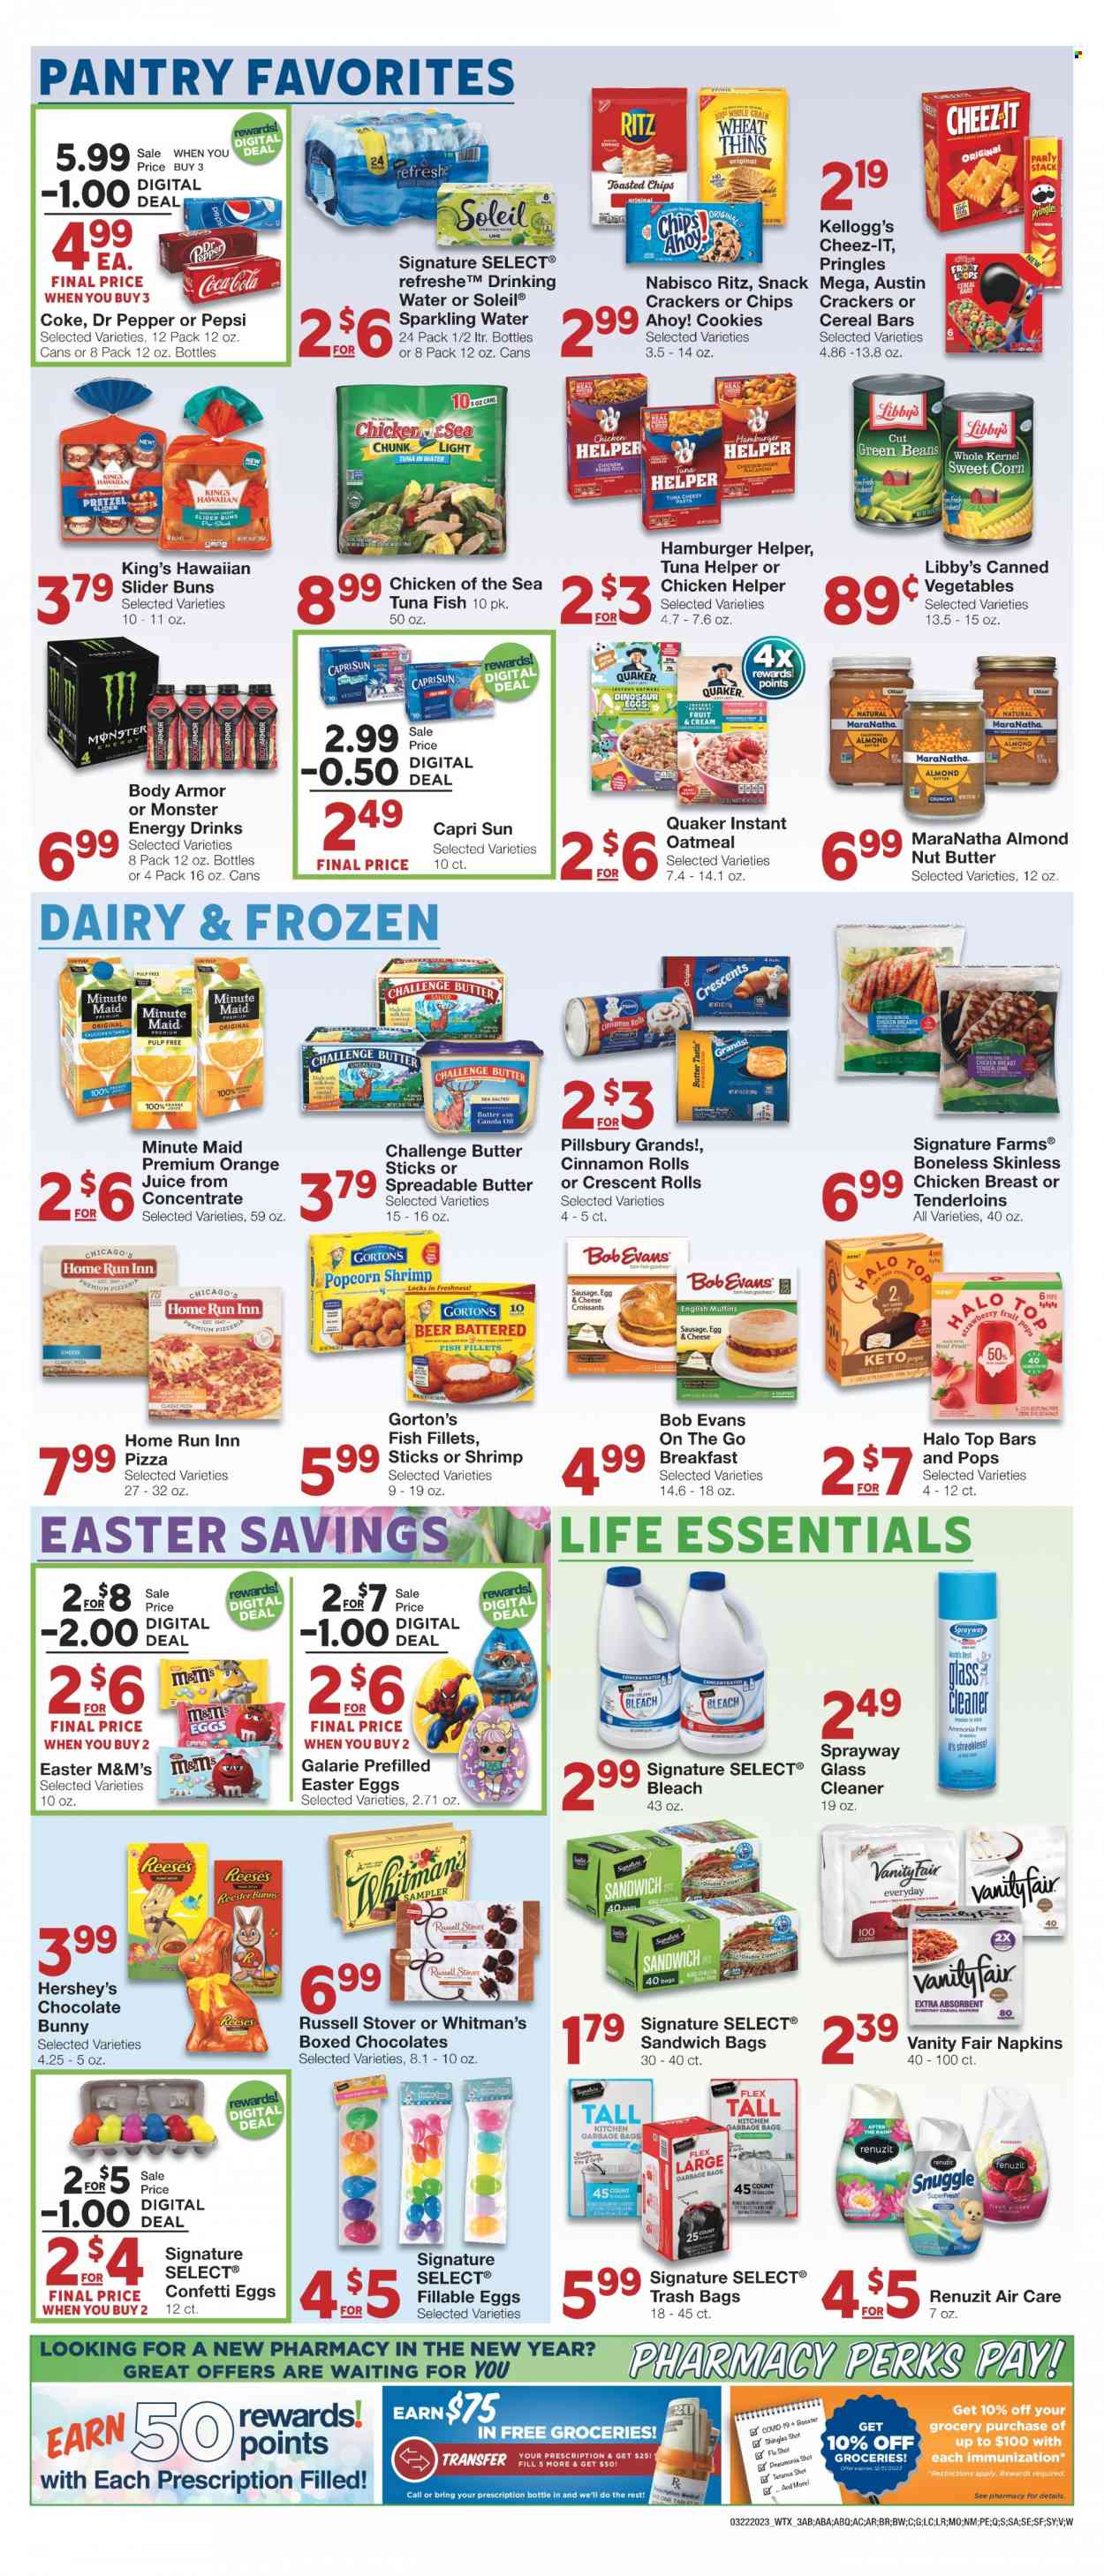 thumbnail - United Supermarkets Flyer - 03/22/2023 - 03/28/2023 - Sales products - buns, cinnamon roll, crescent rolls, chicken breasts, Bob Evans, fish fillets, tuna, fish, shrimps, Gorton's, pizza, Pillsbury, Quaker, spreadable butter, Hershey's, cookies, chocolate, snack, easter egg, M&M's, cereal bar, crackers, Kellogg's, chocolate bunny, RITZ, Pringles, Cheez-It, oatmeal, canned vegetables, Chicken of the Sea, cereals, nut butter, Capri Sun, Coca-Cola, Pepsi, orange juice, juice, Body Armor, energy drink, Monster, Dr. Pepper, Monster Energy, fruit punch, Coke, sparkling water, water, Boost, napkins, cleaner, bleach, trash bags, Renuzit. Page 3.